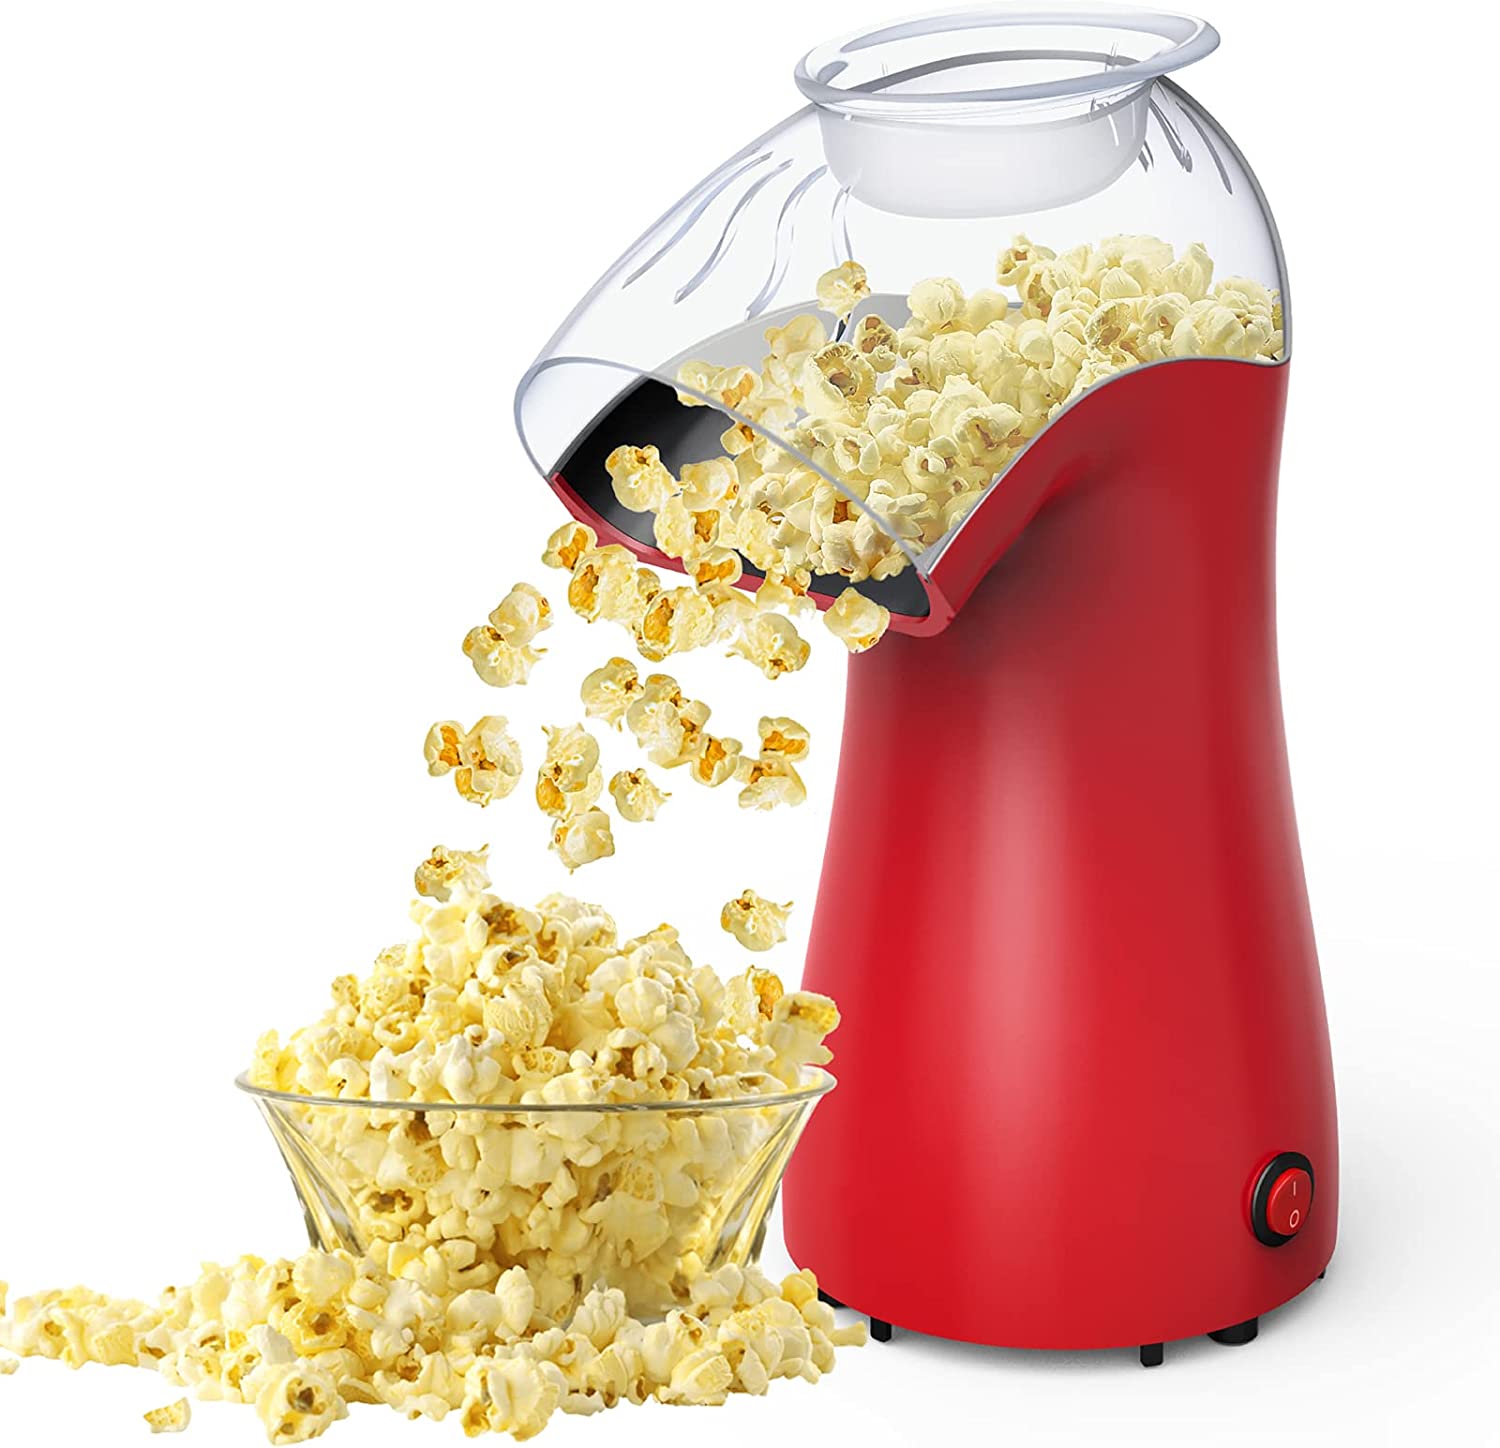 JEANLADS Leadpo Hot Air Popcorn Machine Home Popcorn Maker BPA Free 96% Popping Rate 2 Minutes Fast Electric Popcorn Popper with Measuring Cup and Removable Lid